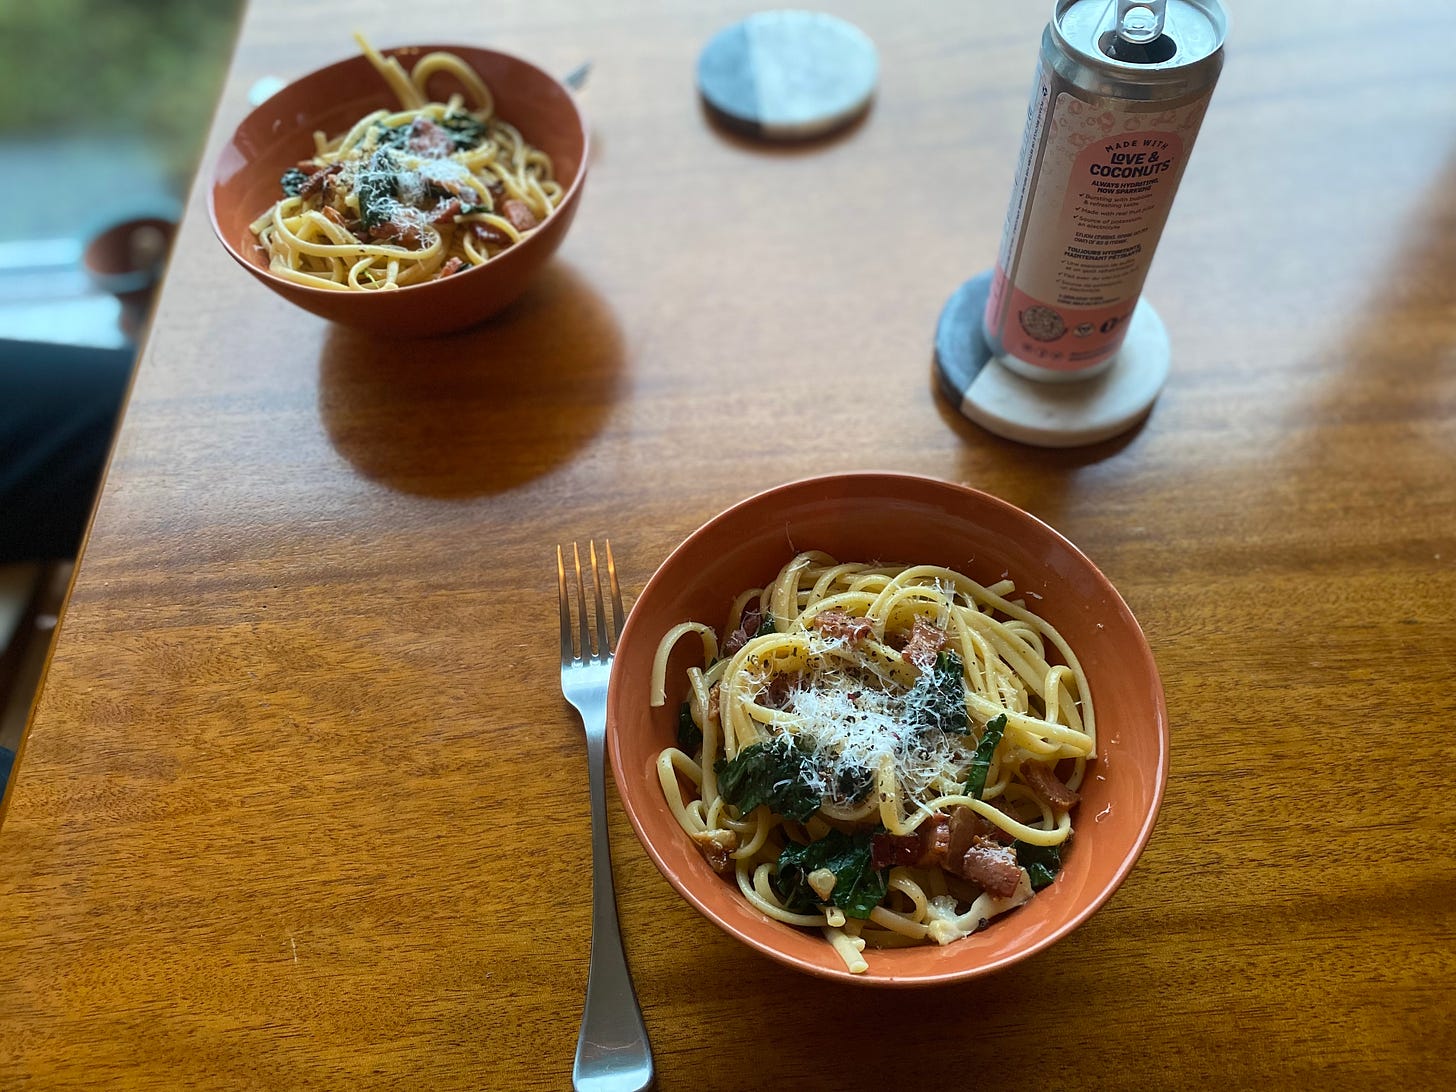 Two orange bowls of the pasta described above: chopped bacon, cauliflower pieces, dark green kale leaves in linguine with parmesan and black pepper on top.